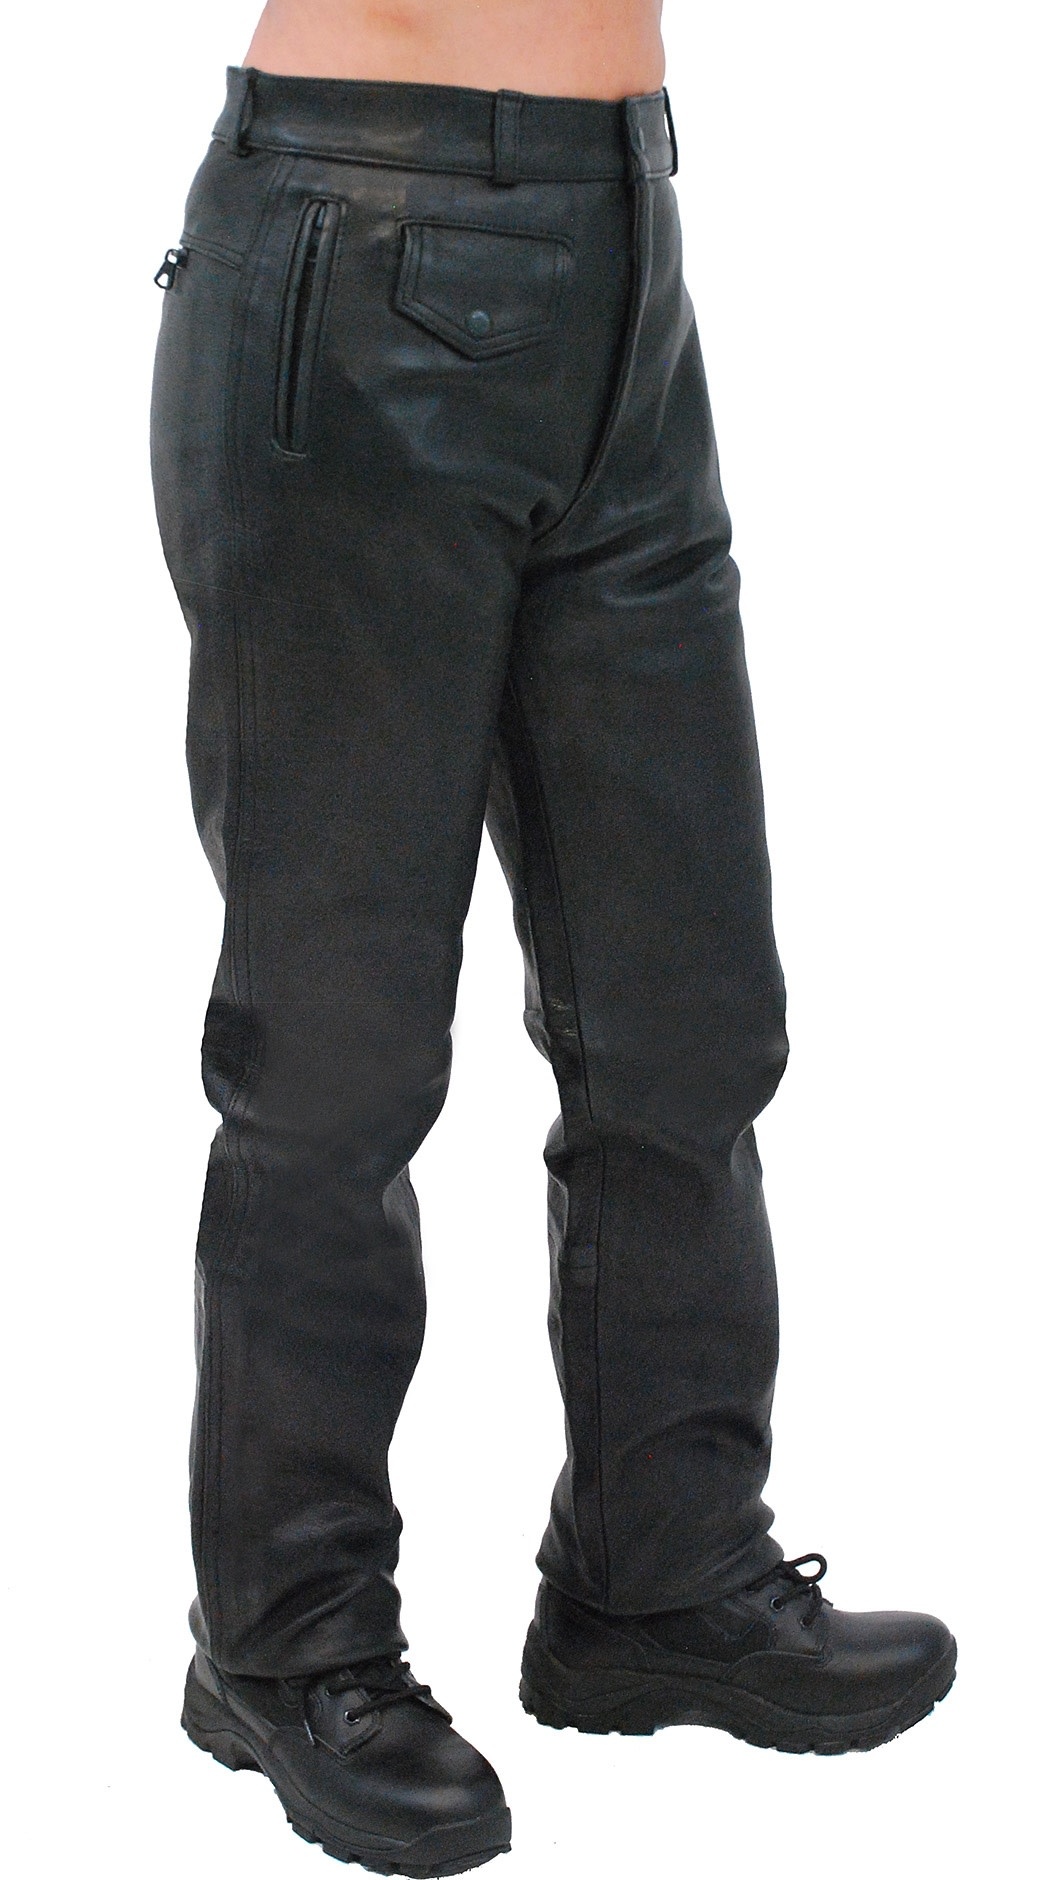 Knox on Twitter We offer a range of high waisted KnoxArmour Womens  motorcycle trousers KnoxArmour httpstcouQrEOzTjcG  httpstcoj4qVT9CtNo  Twitter